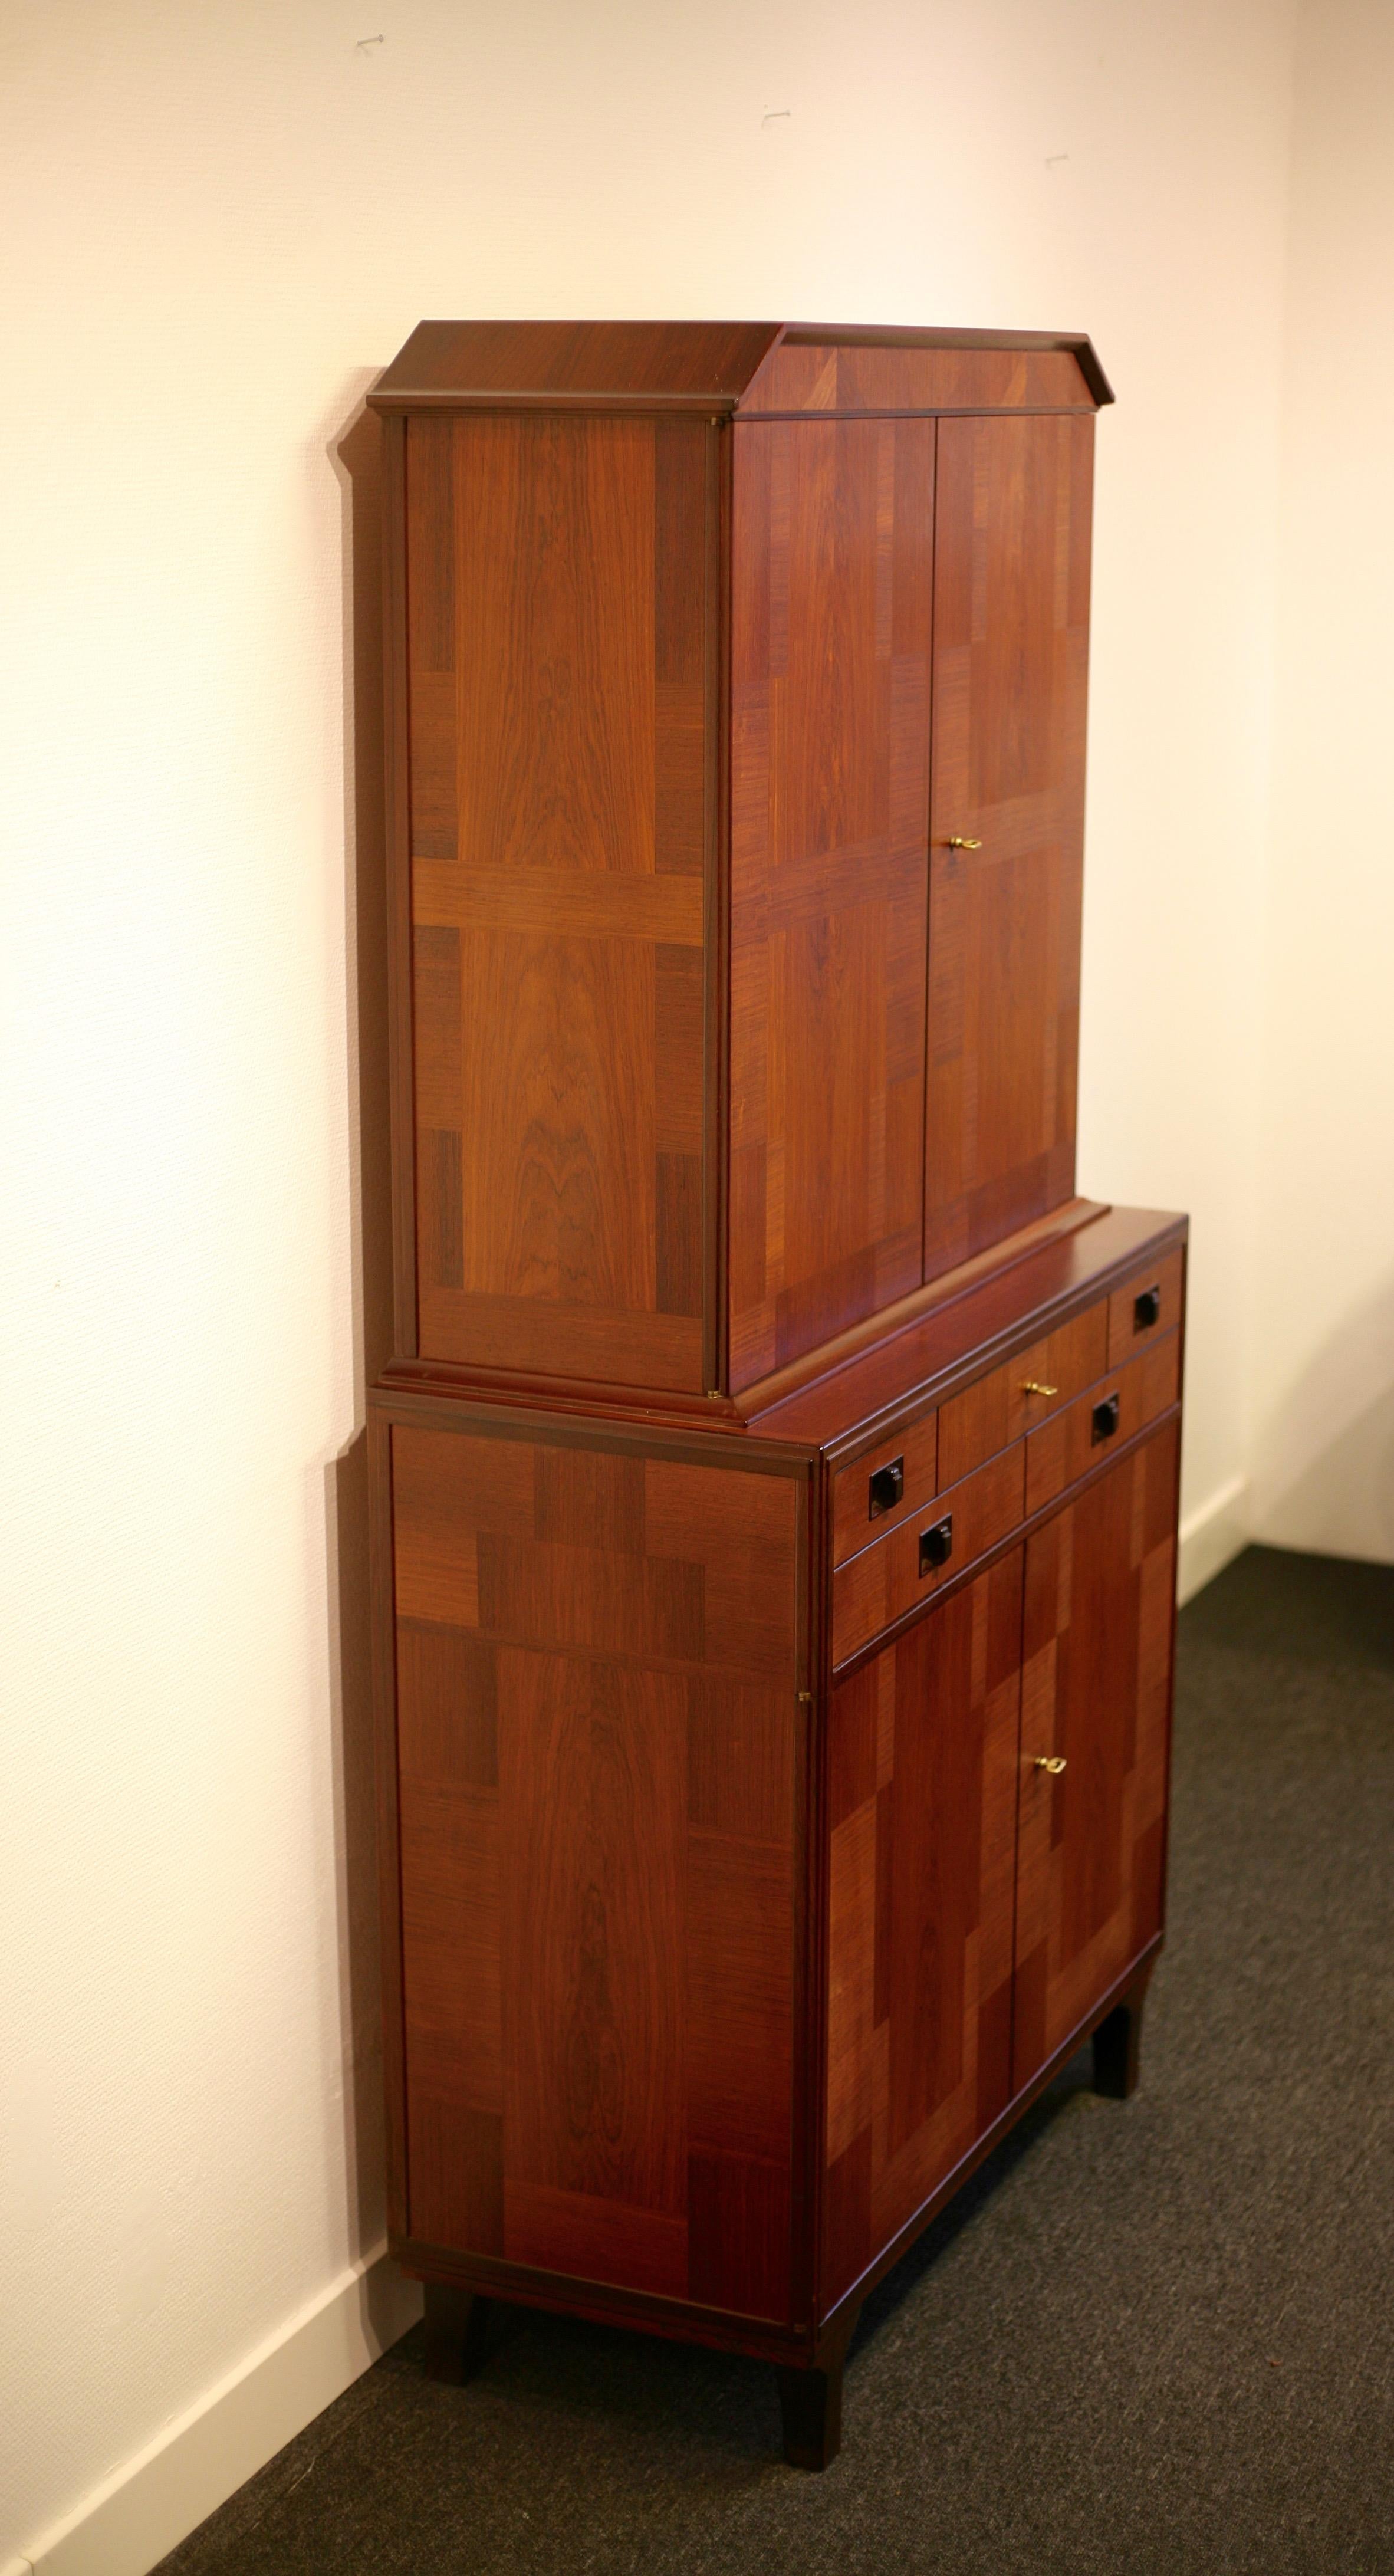 Rare and exquisite cabinet, Middle Kingdom, manufactured by Carl Malmsten´s own workshop. A variety of woods, teak, mahogany and rosewood, makes this cabinet highly exclusive since it normally only was made of one type of wood. Excellent vintage